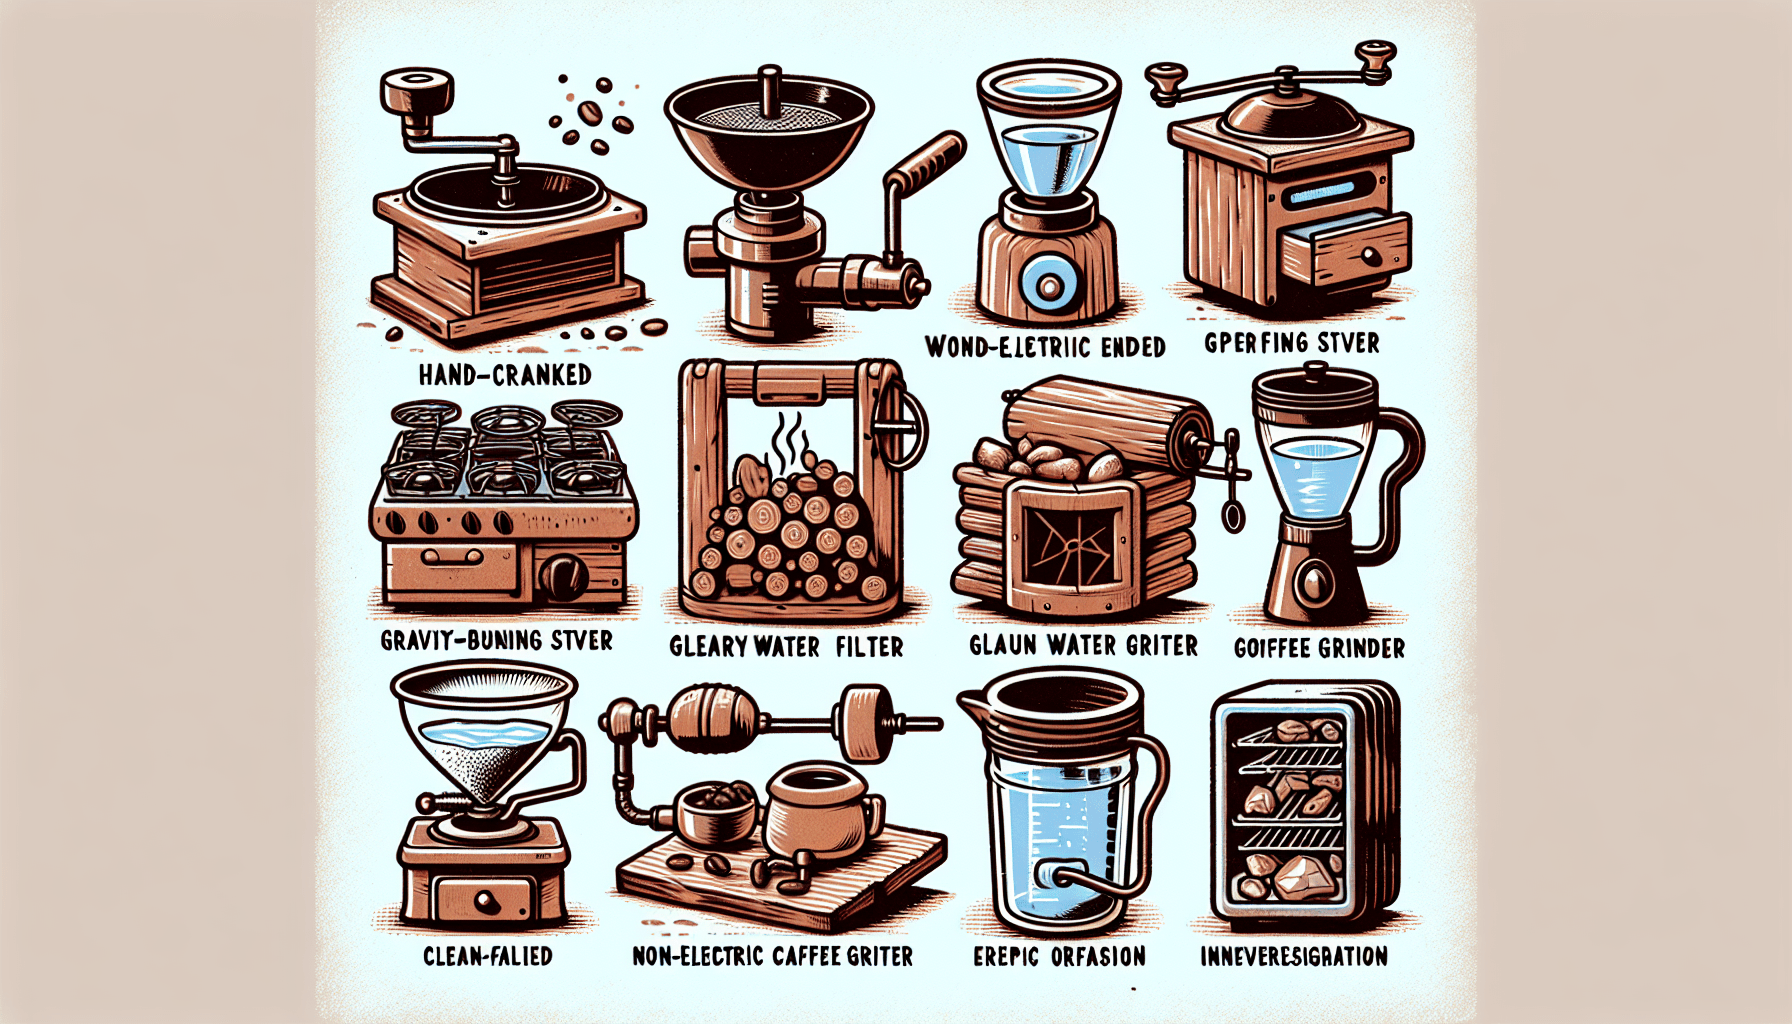 The Best Non-Electric Appliances For Off-Grid Living